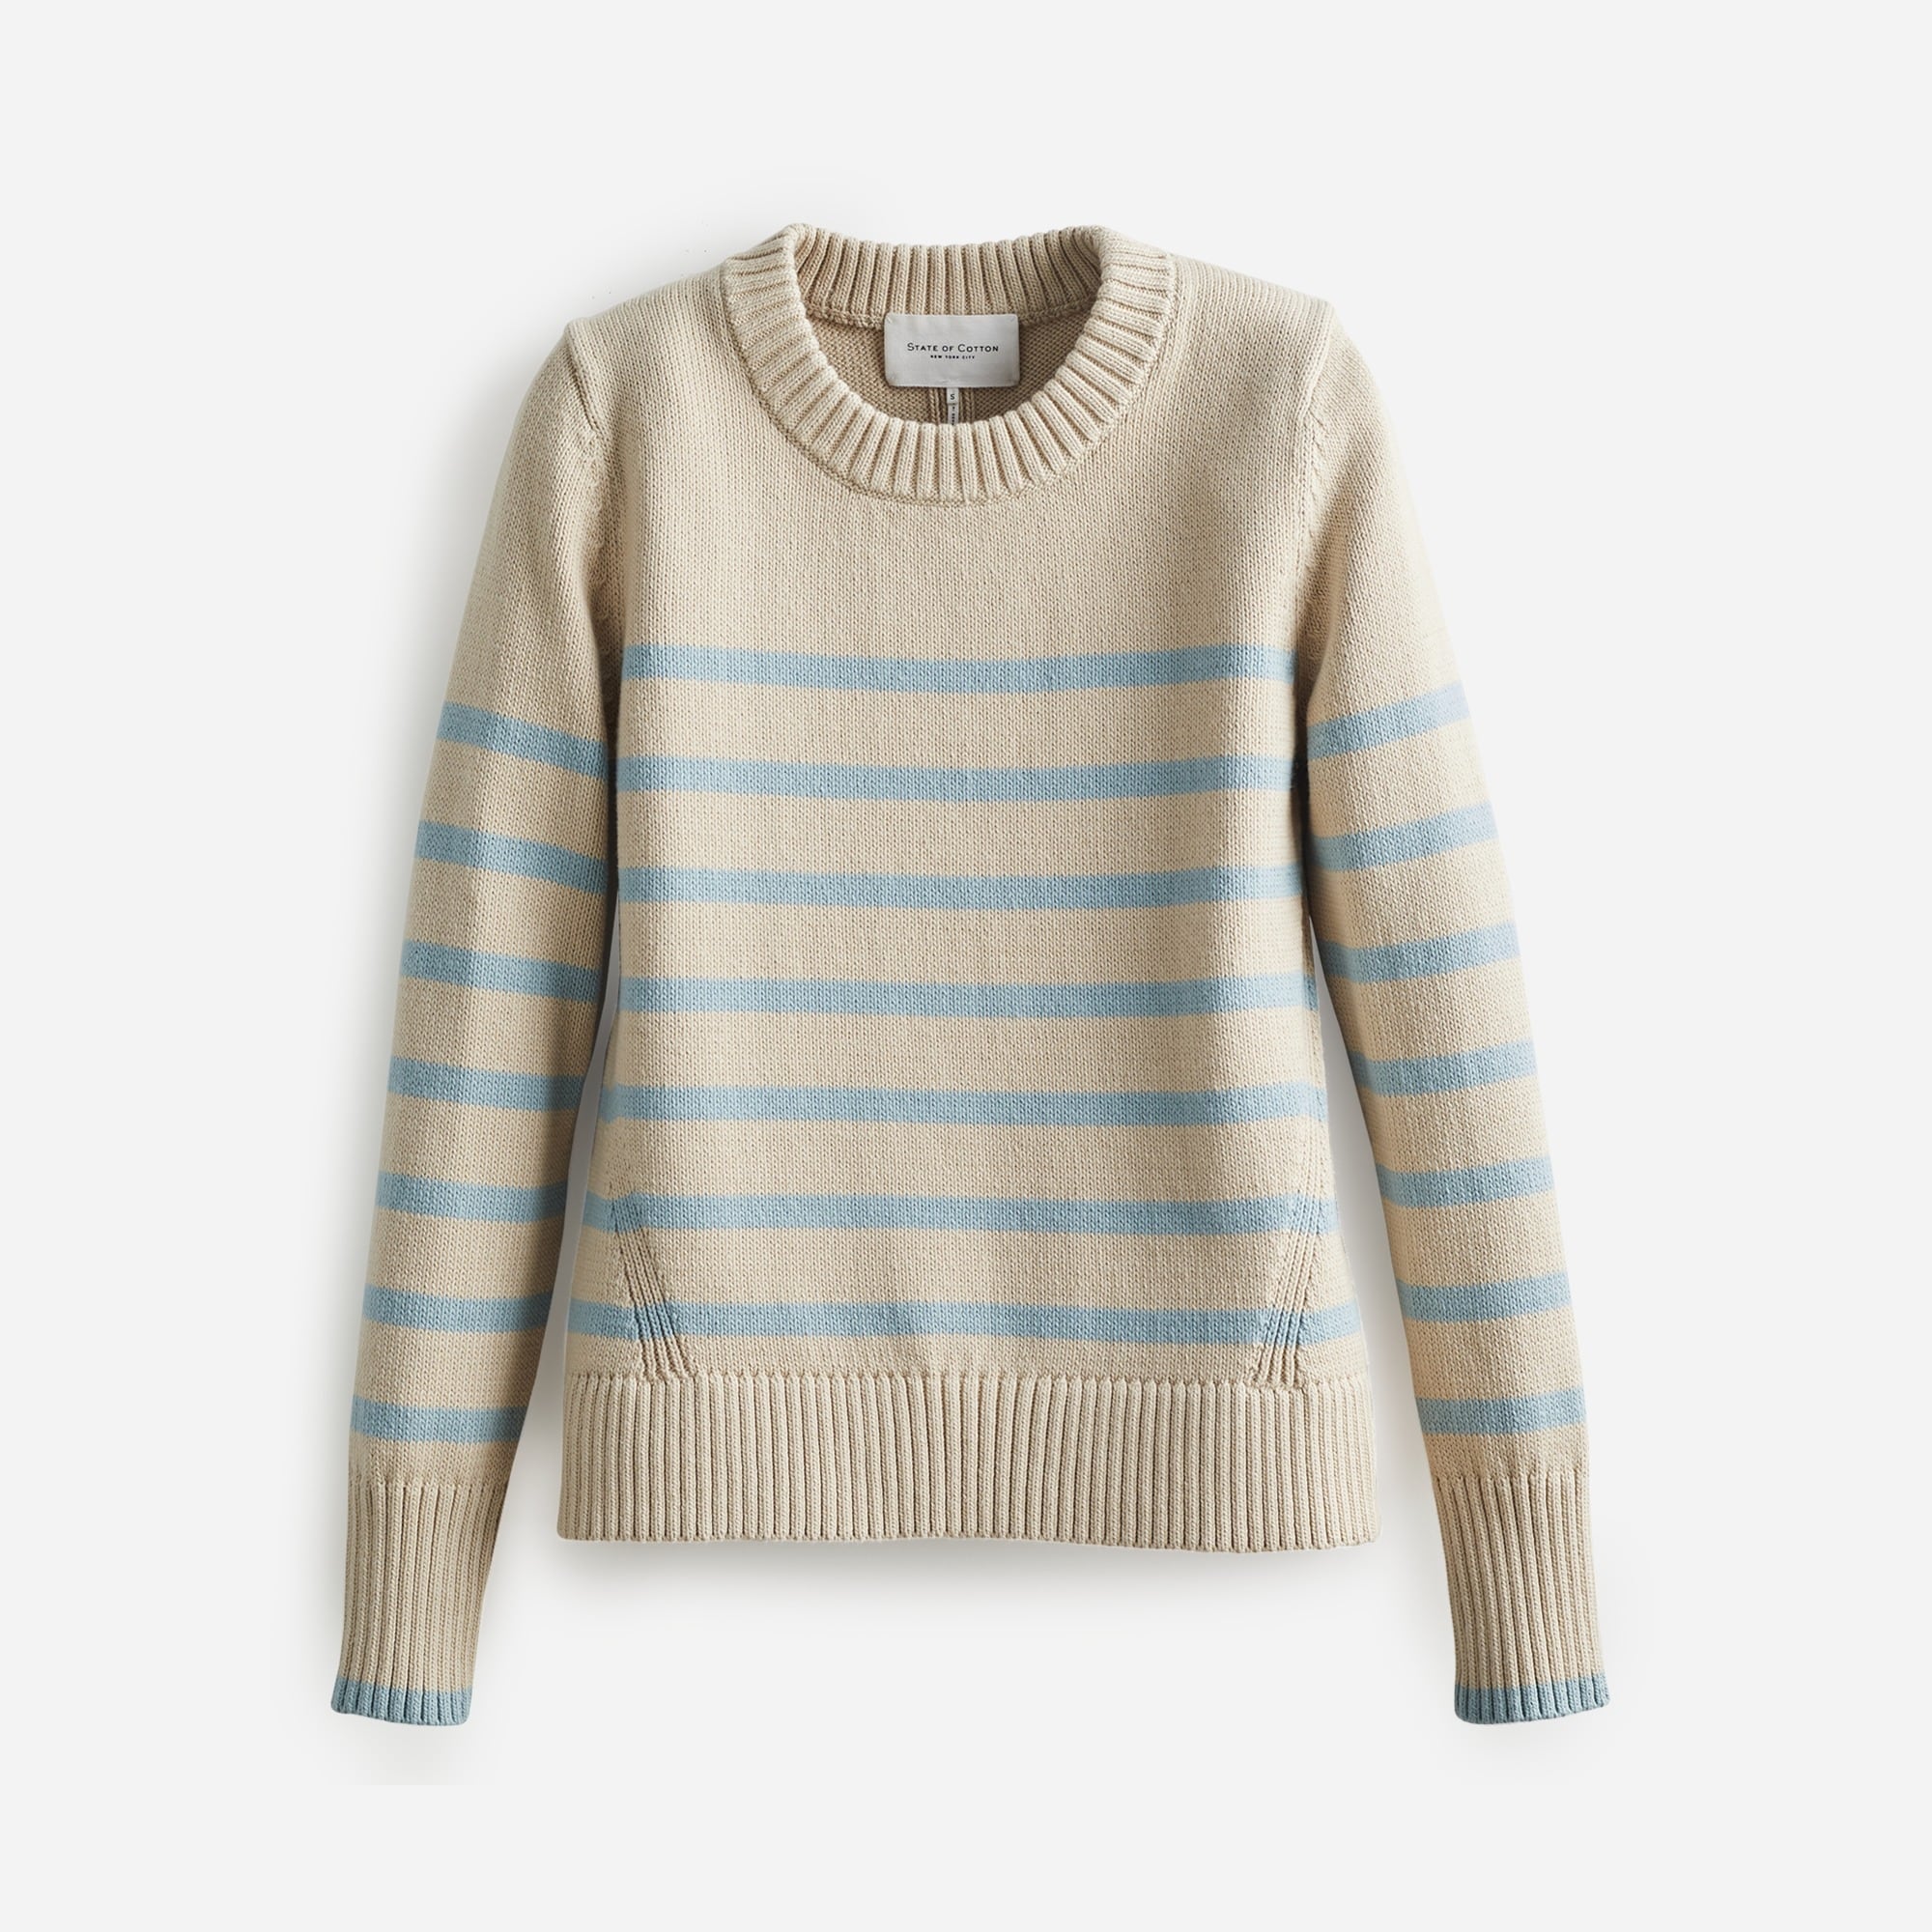  State of Cotton NYC Castine striped sweater